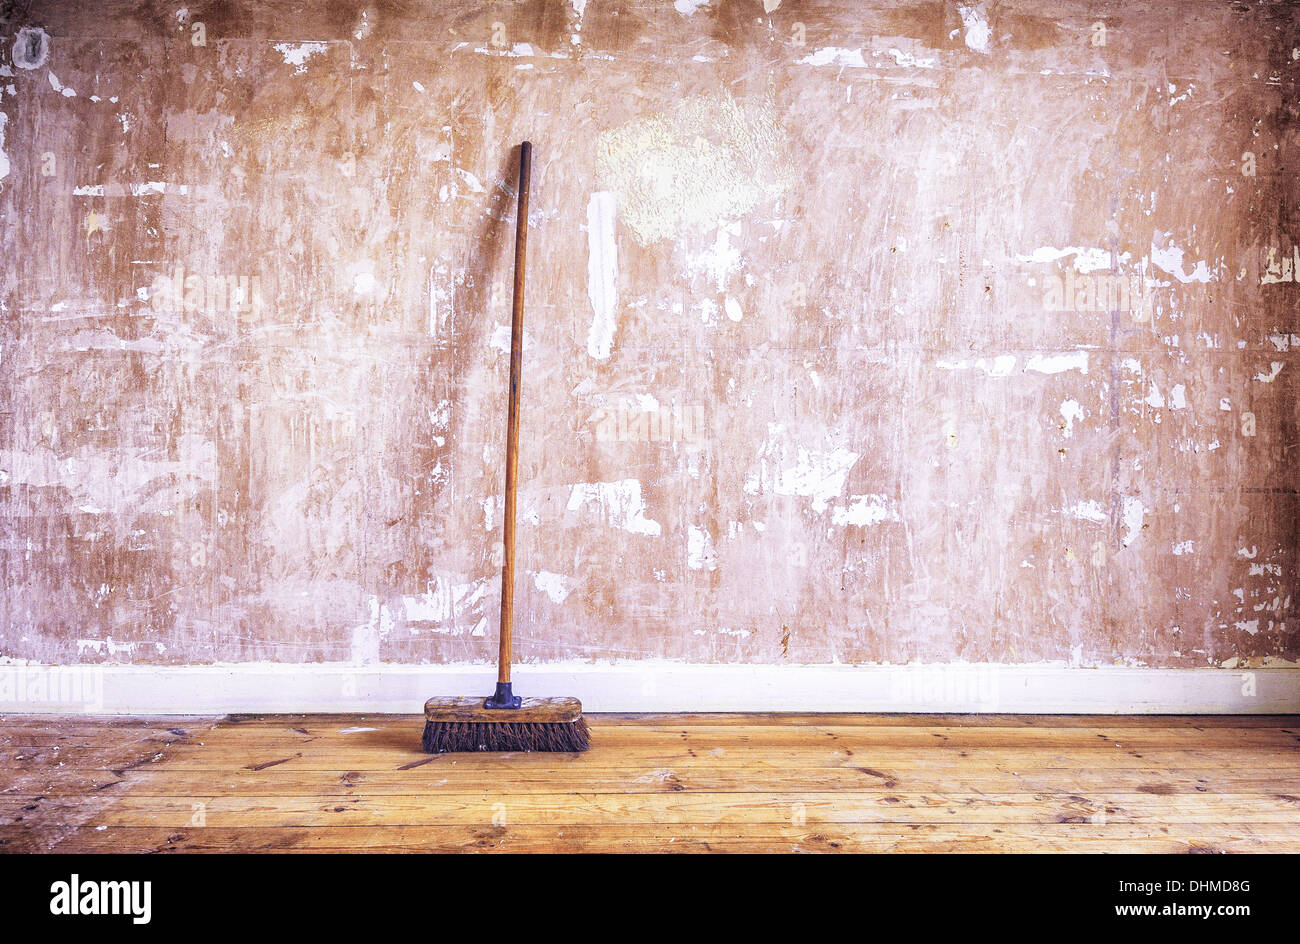 A wooden brush (broom) leaning against a stripped plasterboard wall (drywall) during home decorating improvement renovation Stock Photo